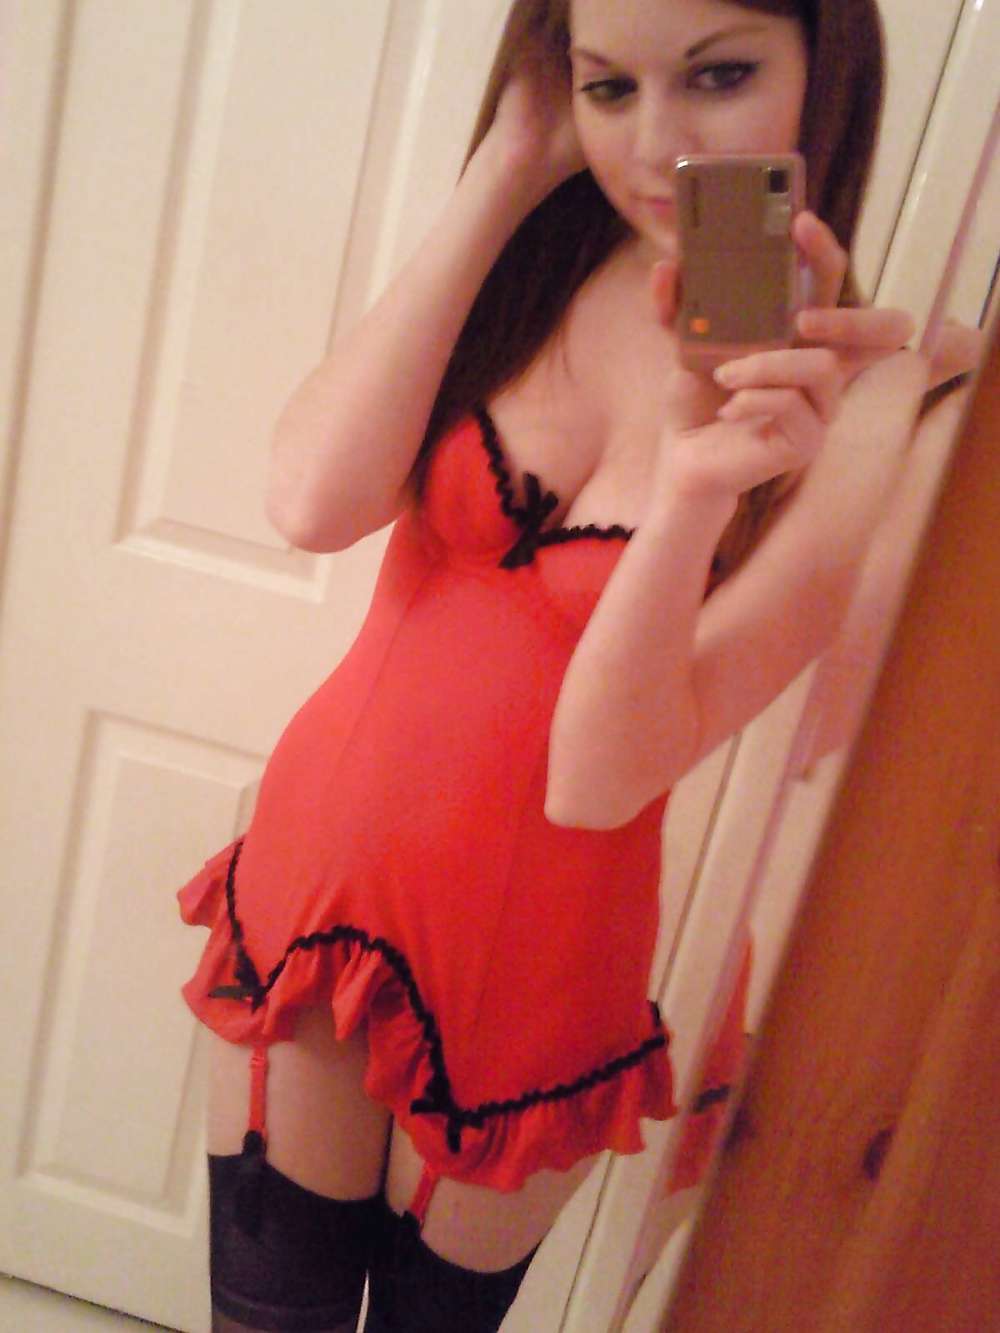 HORNY TEEN SELF SHOT.1 - COOLBUDY pict gal